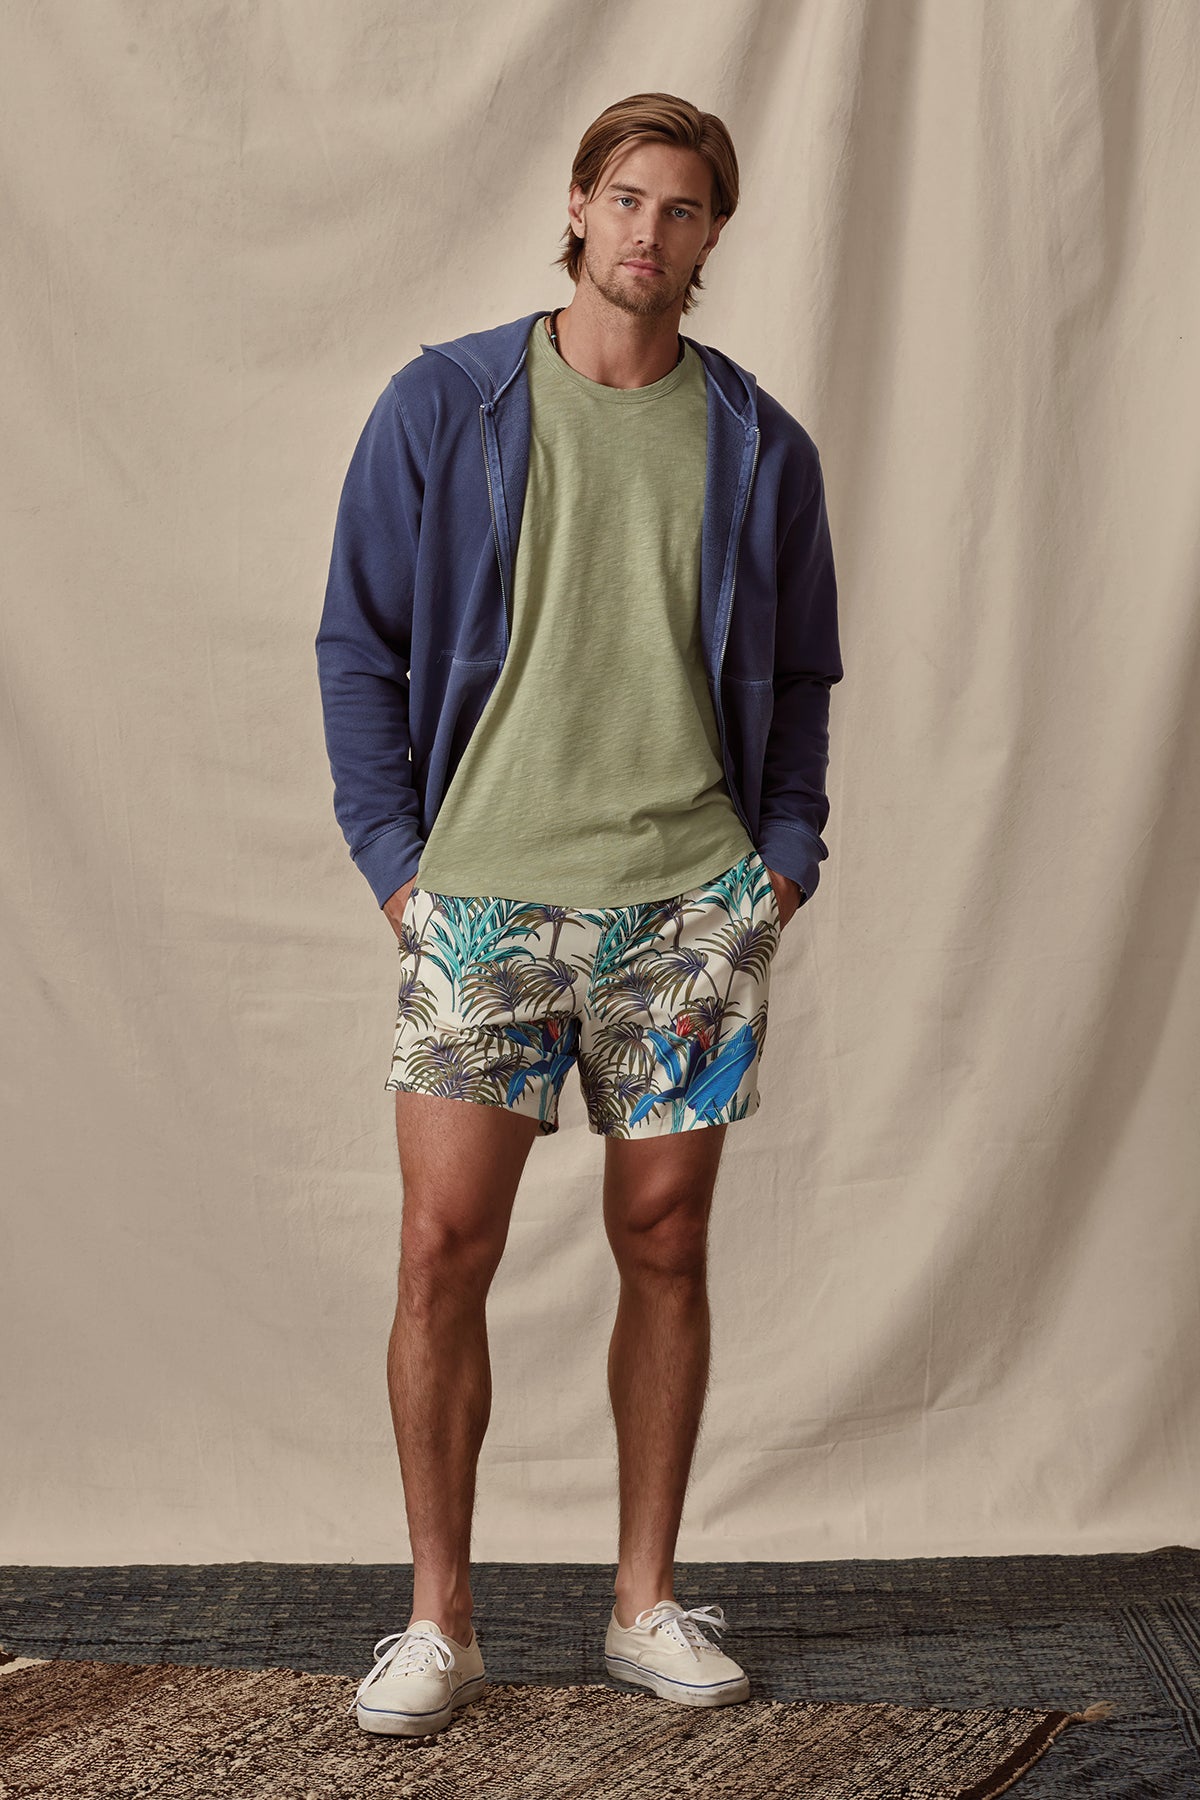   A man wearing a zip-up hoodie, t-shirt, and RICARDO SWIM SHORT by Velvet by Graham & Spencer stands confidently against a cream backdrop. 